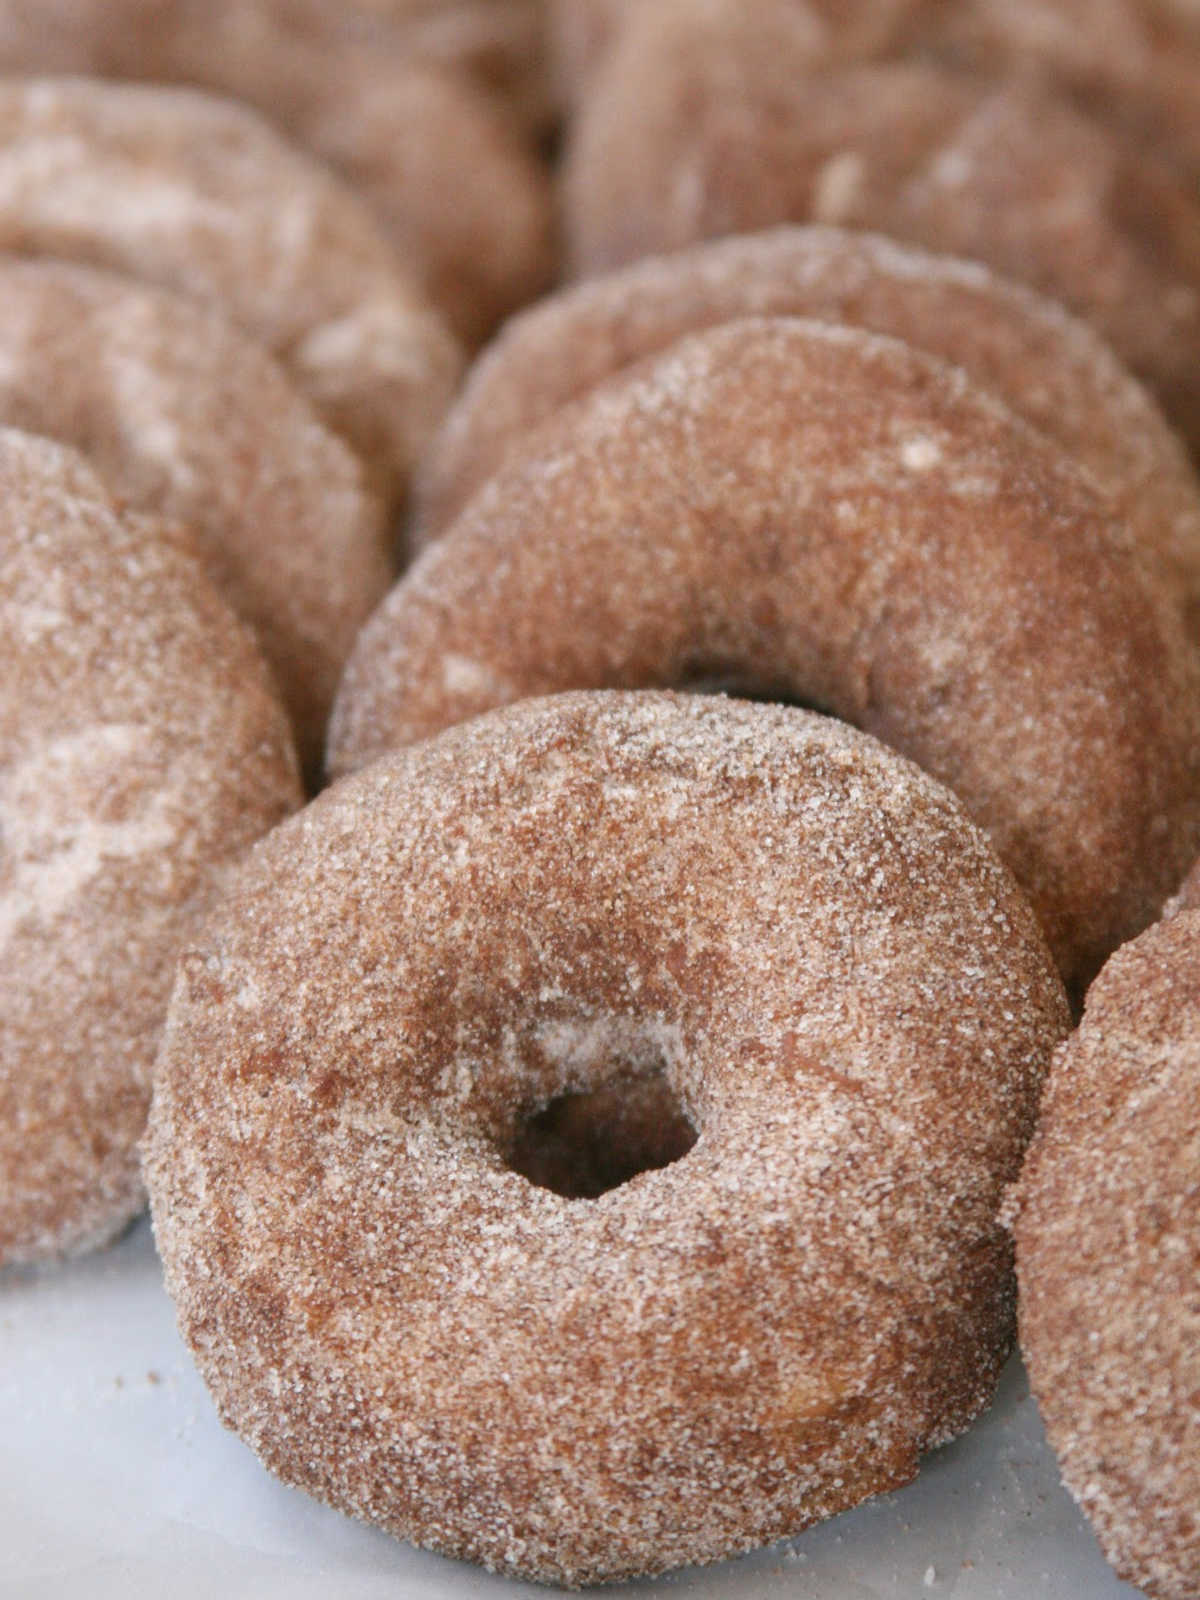 Cider donuts with cinnamon sugar coating leaning against each other on tray.